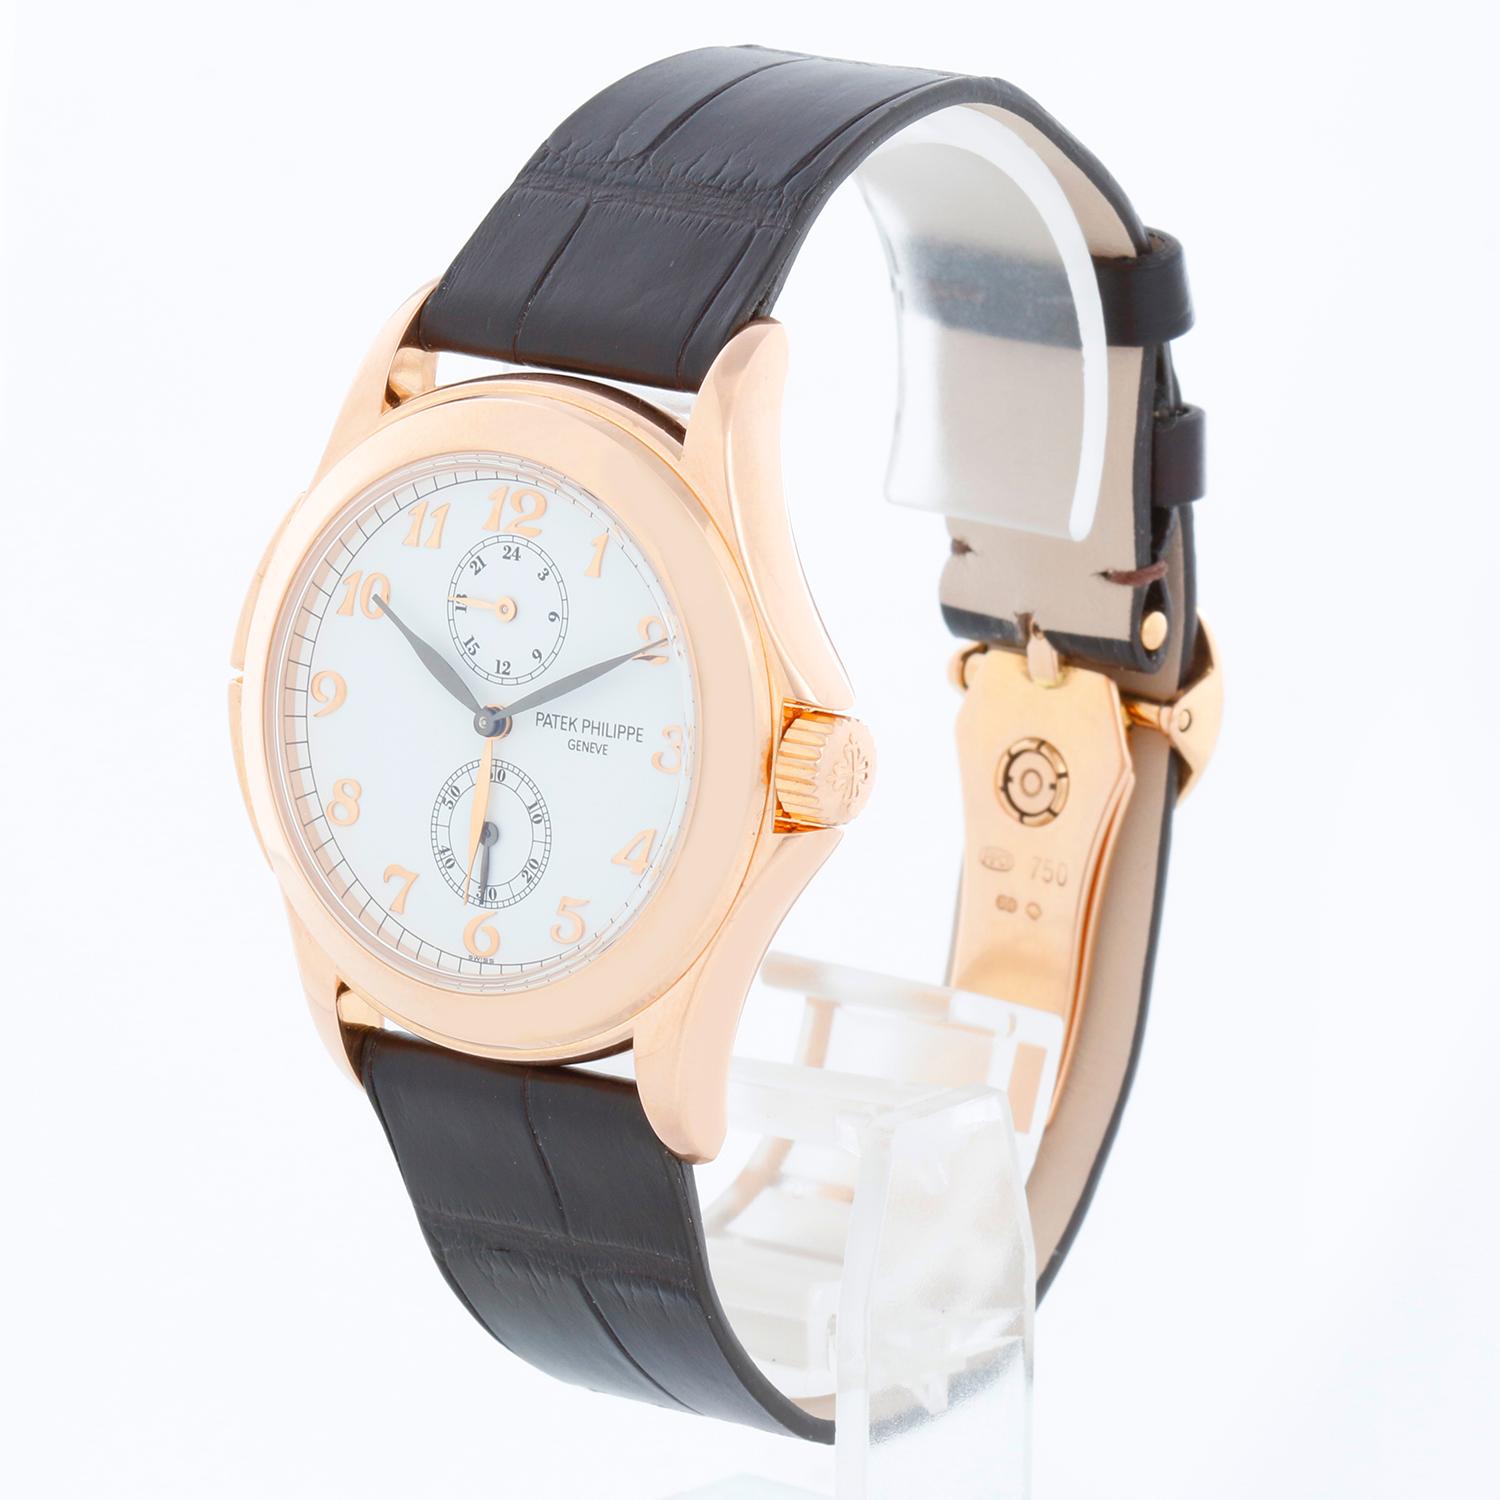 Collectible Patek Philippe Travel Time Men's 18k Rose Gold Watch 5134 R or 5134R - Manual winding; dual time. 18k rose gold case with exposition back (36mm diameter). White dial with rose gold raised numerals. Dark Brown aftermarket strap band; 18k